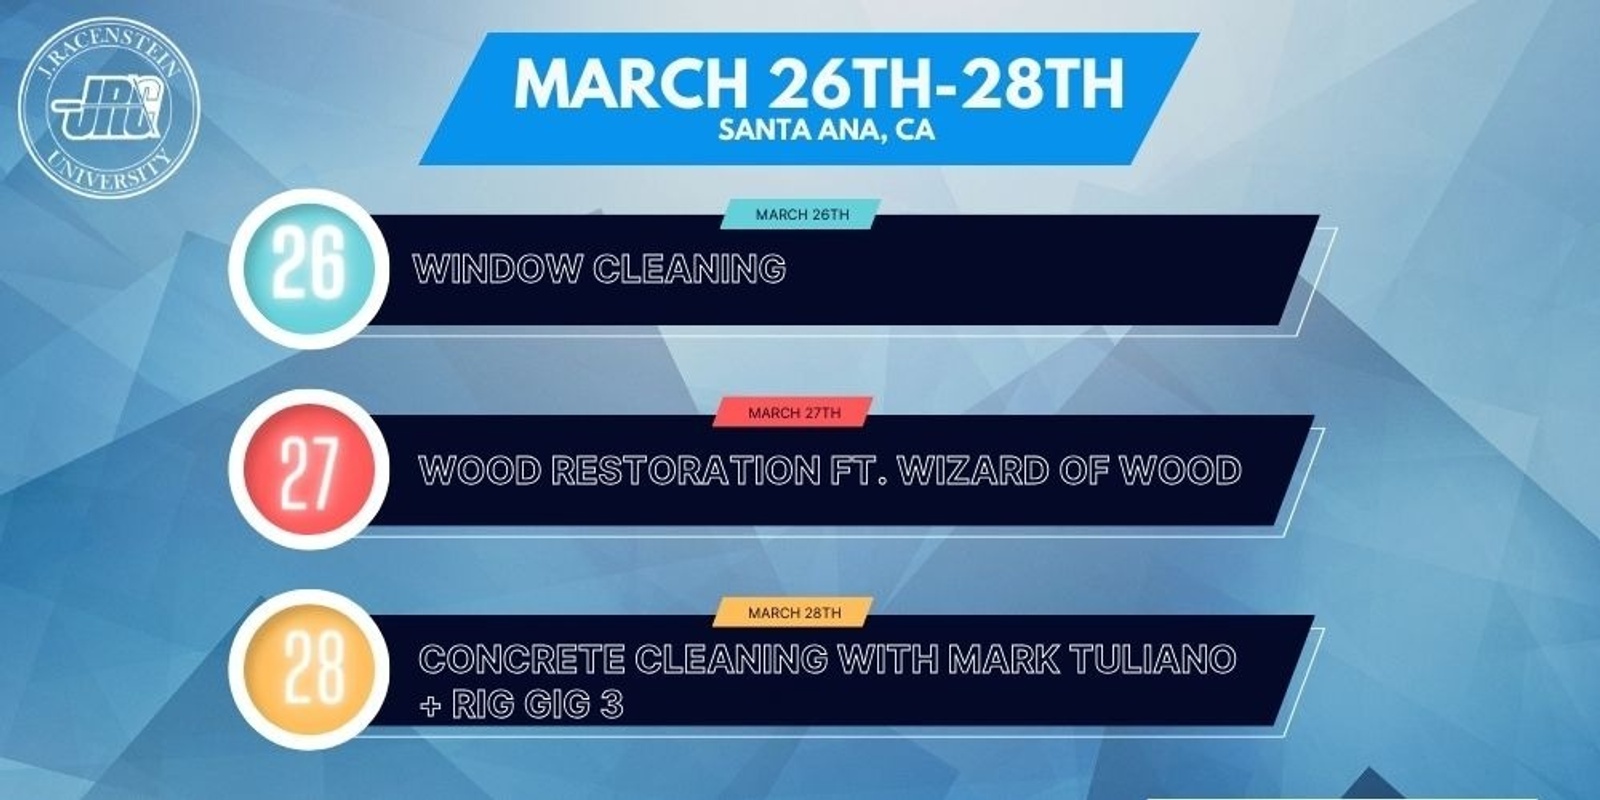 Banner image for March 26-28th: Window Cleaning, Soft Wash Cleaning, Concrete Cleaning